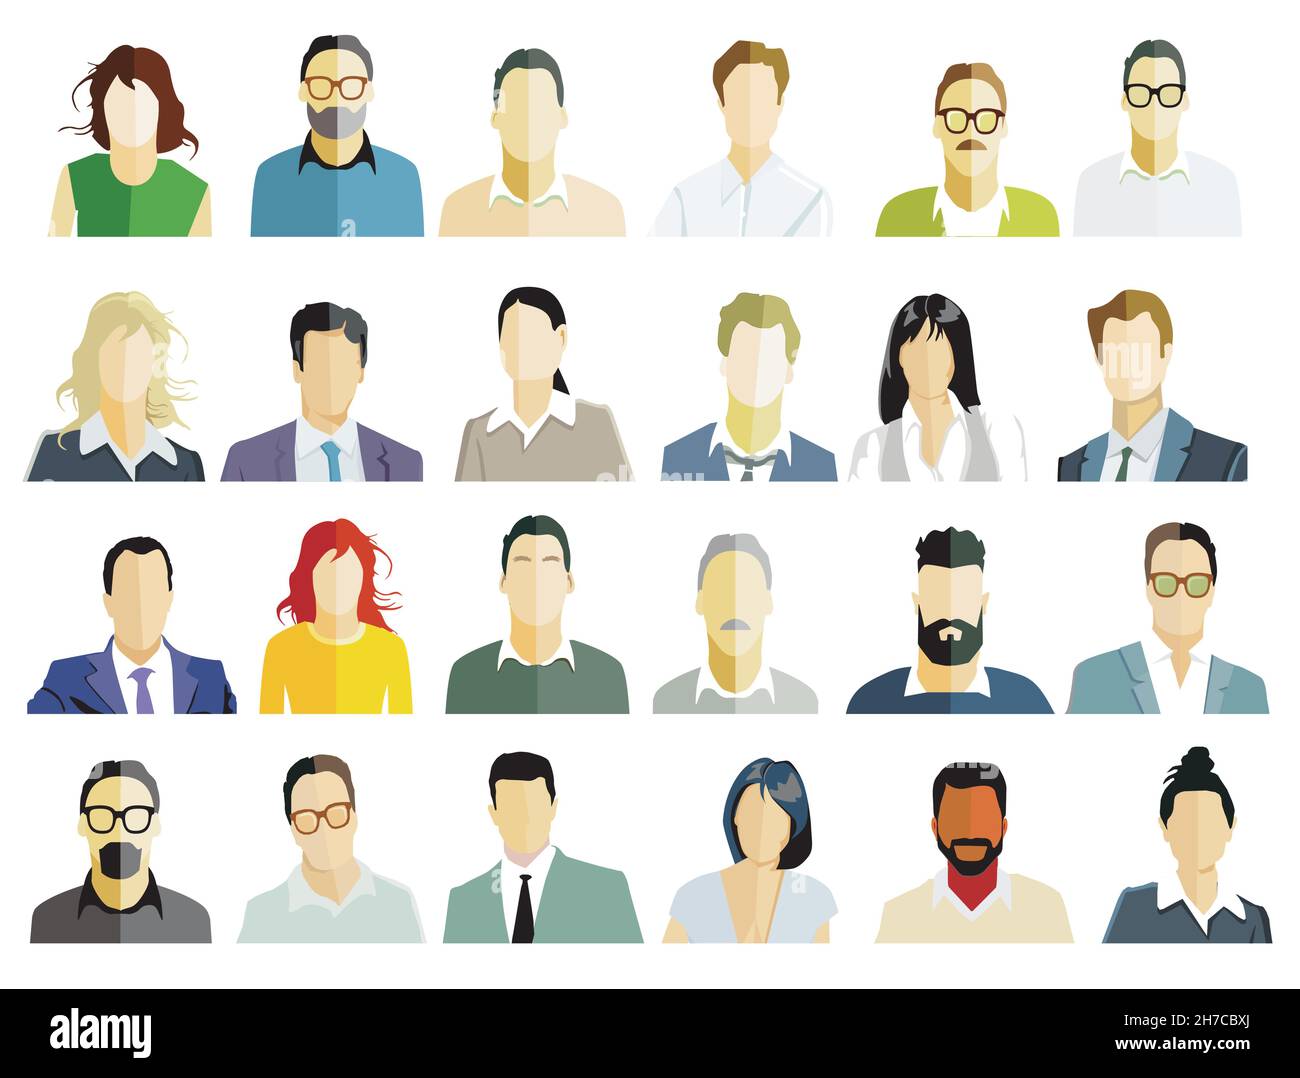 Group of people portrait, faces on white background. illustration Stock Vector